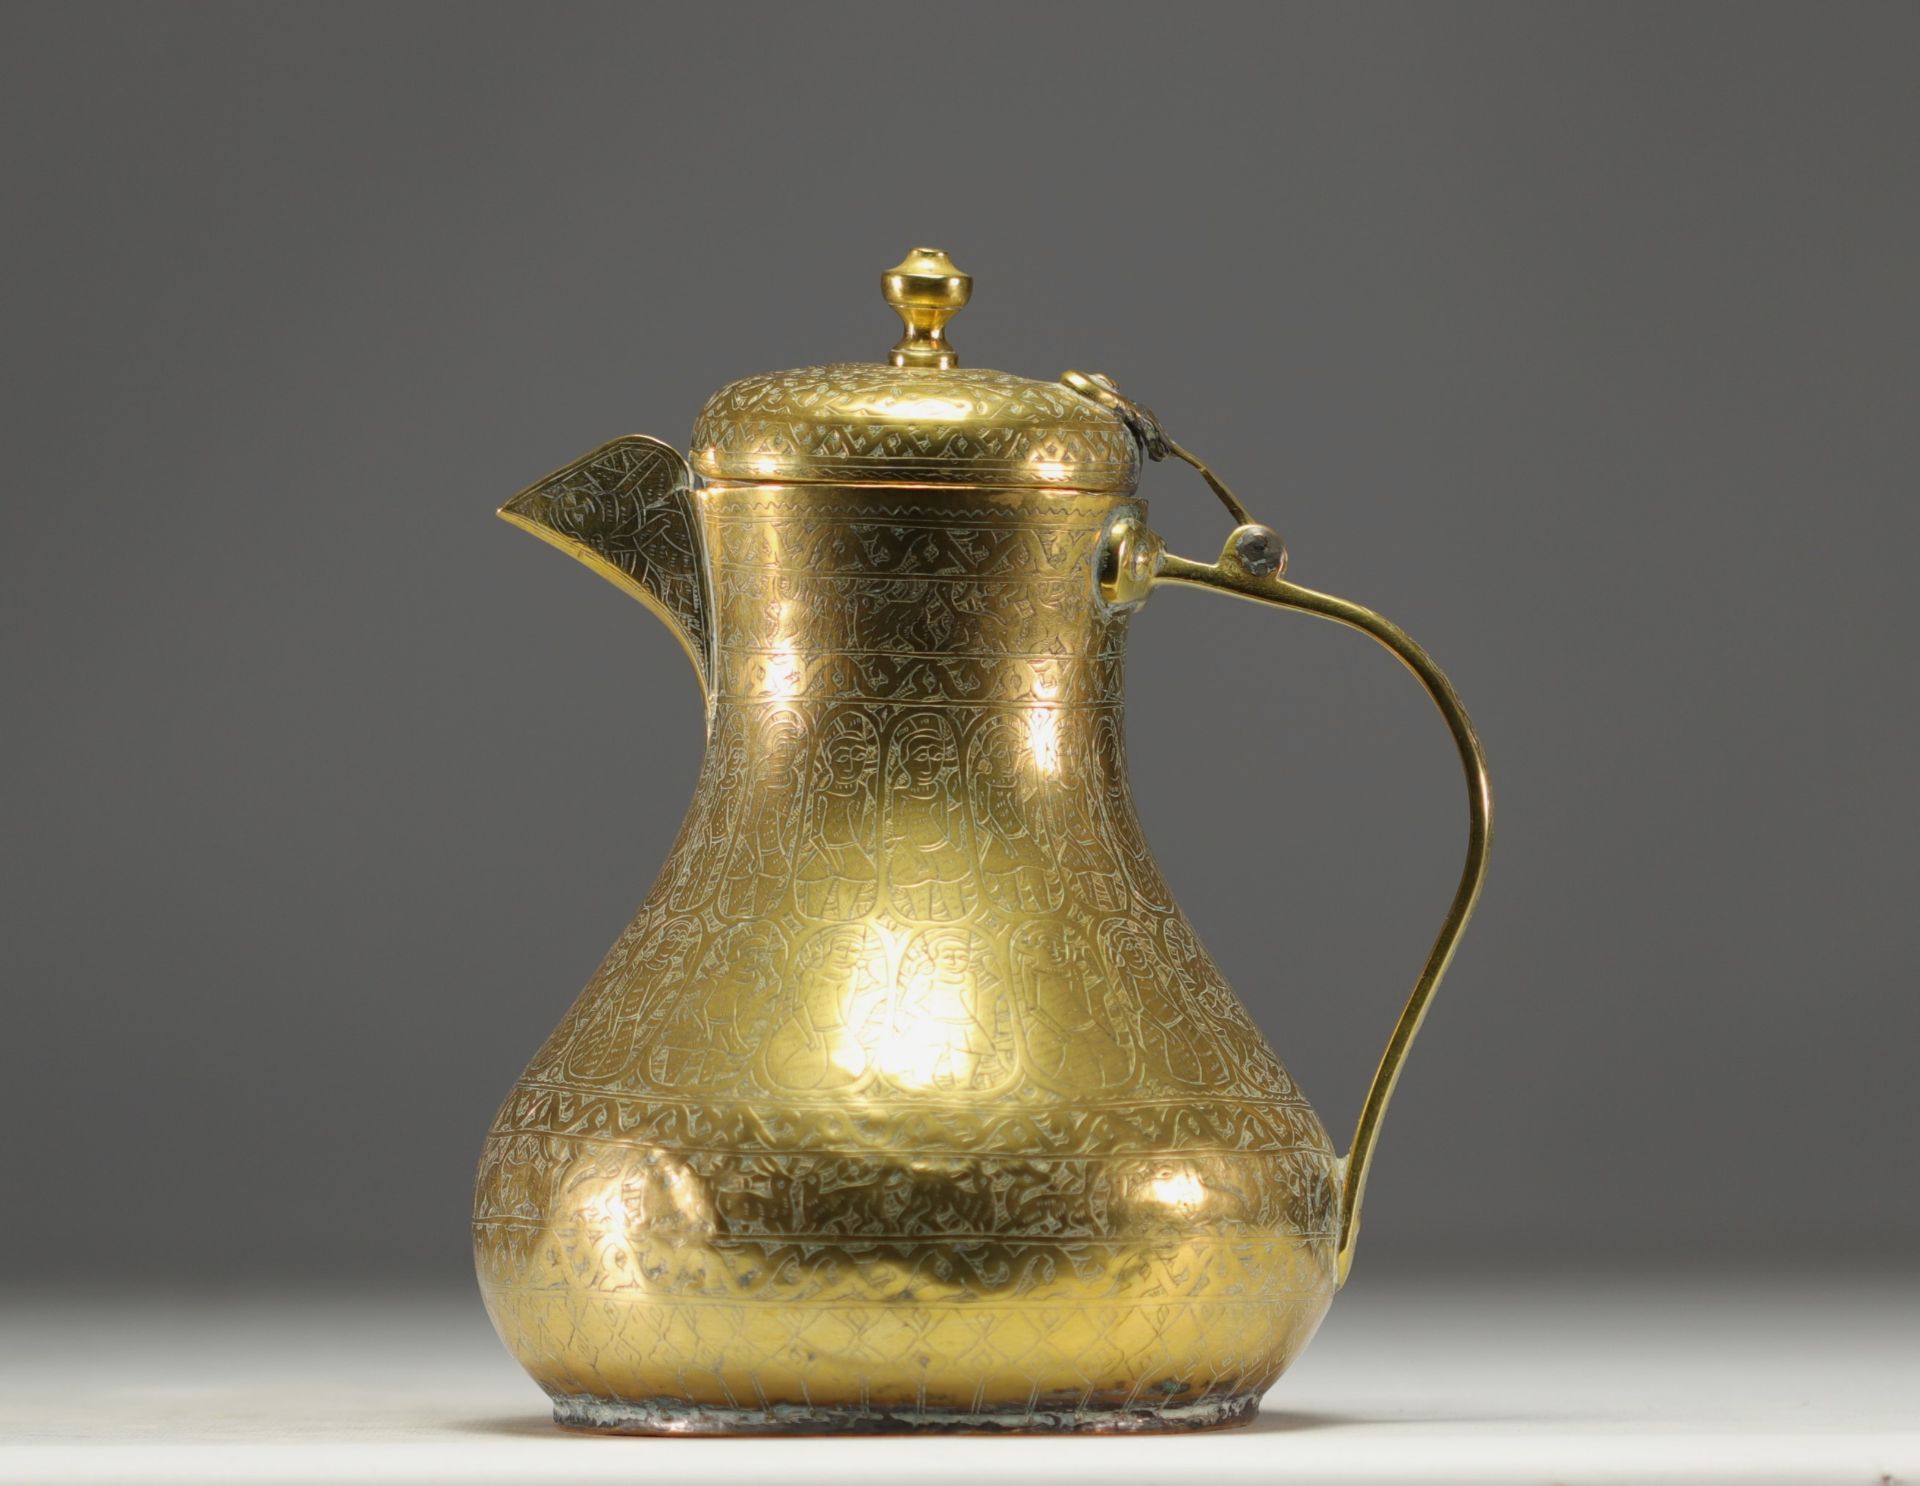 Persian coffee pot in chased brass with animal and figure motifs.